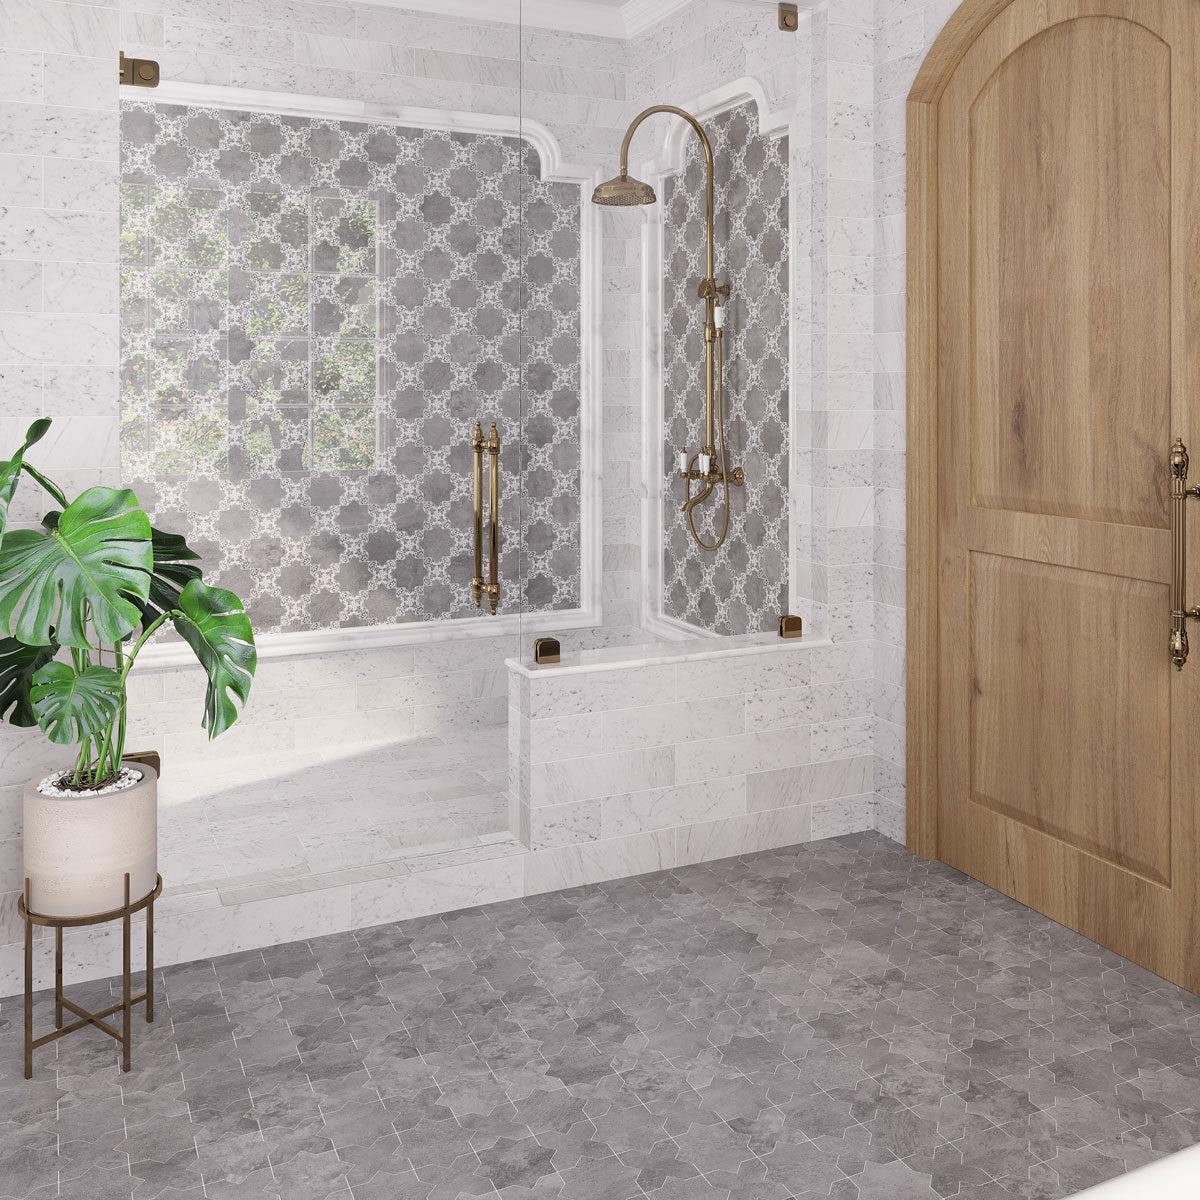 Santa Barbara mix and match tiles in Smoke Gray for a decorative shower design